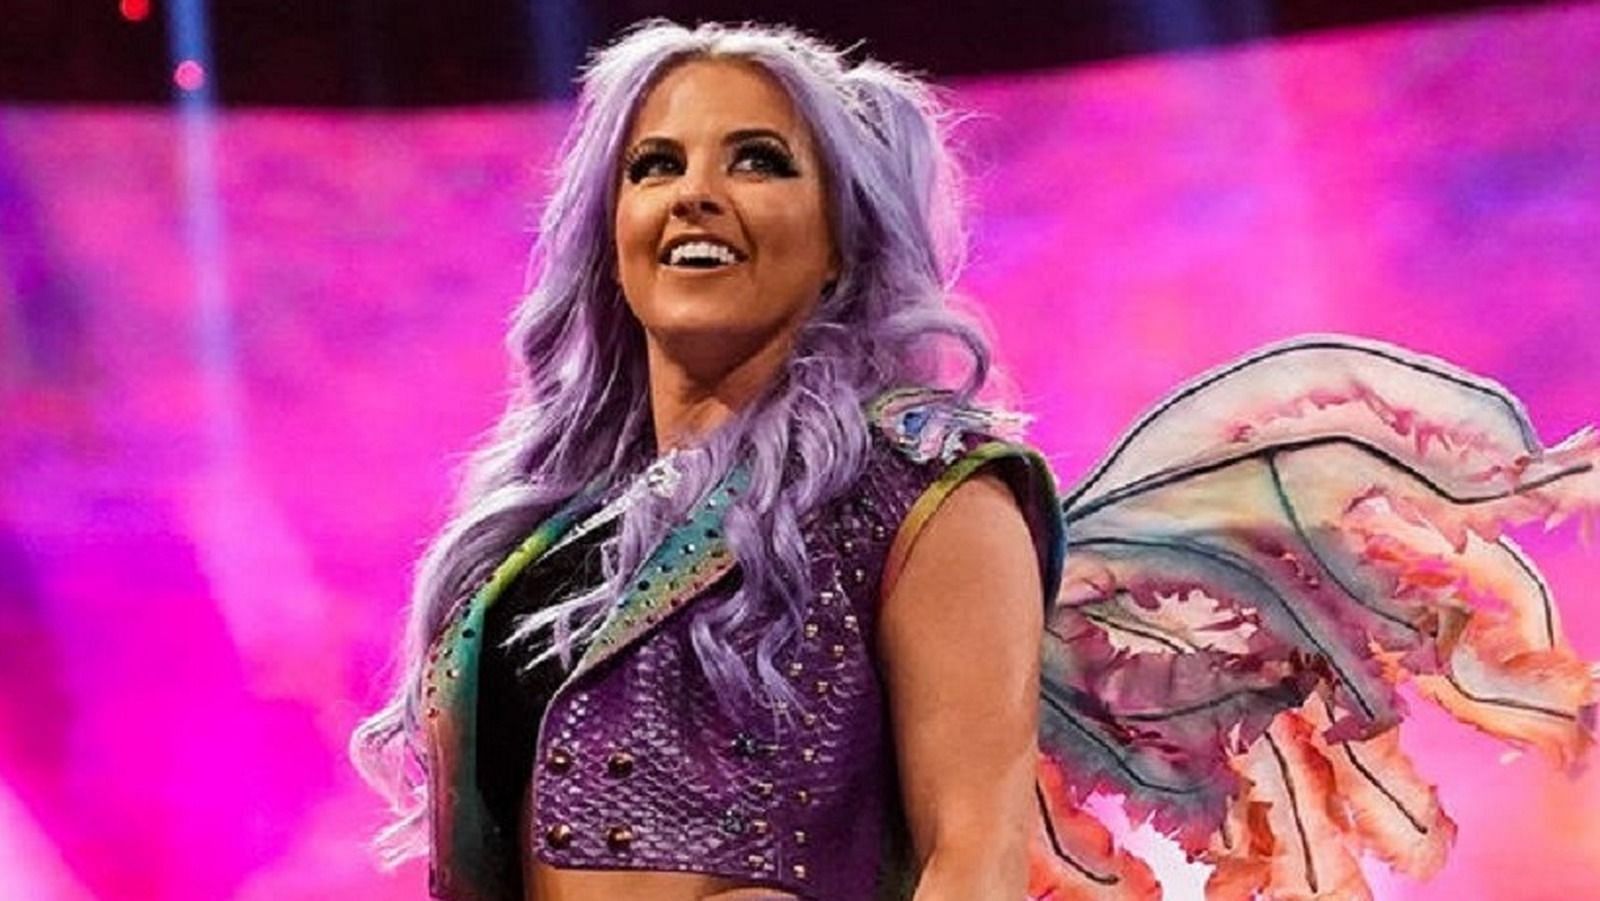 Candice LeRae made her debut for the RAW brand on Monday night, but here are some facts about her that you may not know about the Poison Pixie..